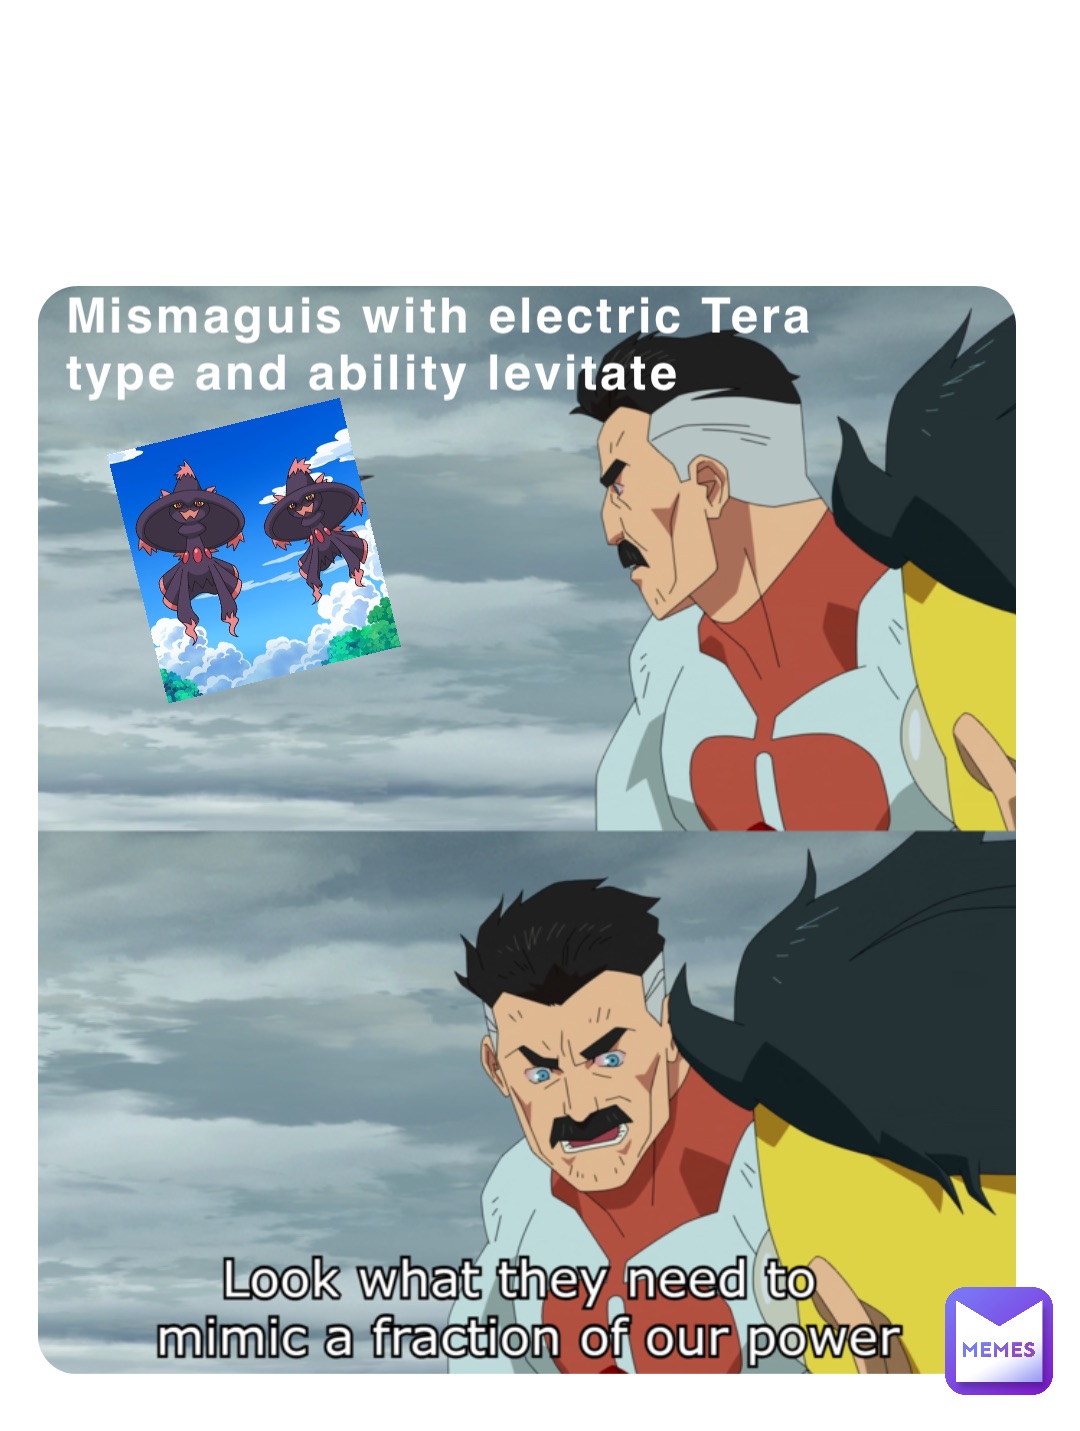 Mismaguis with electric Tera type and ability levitate